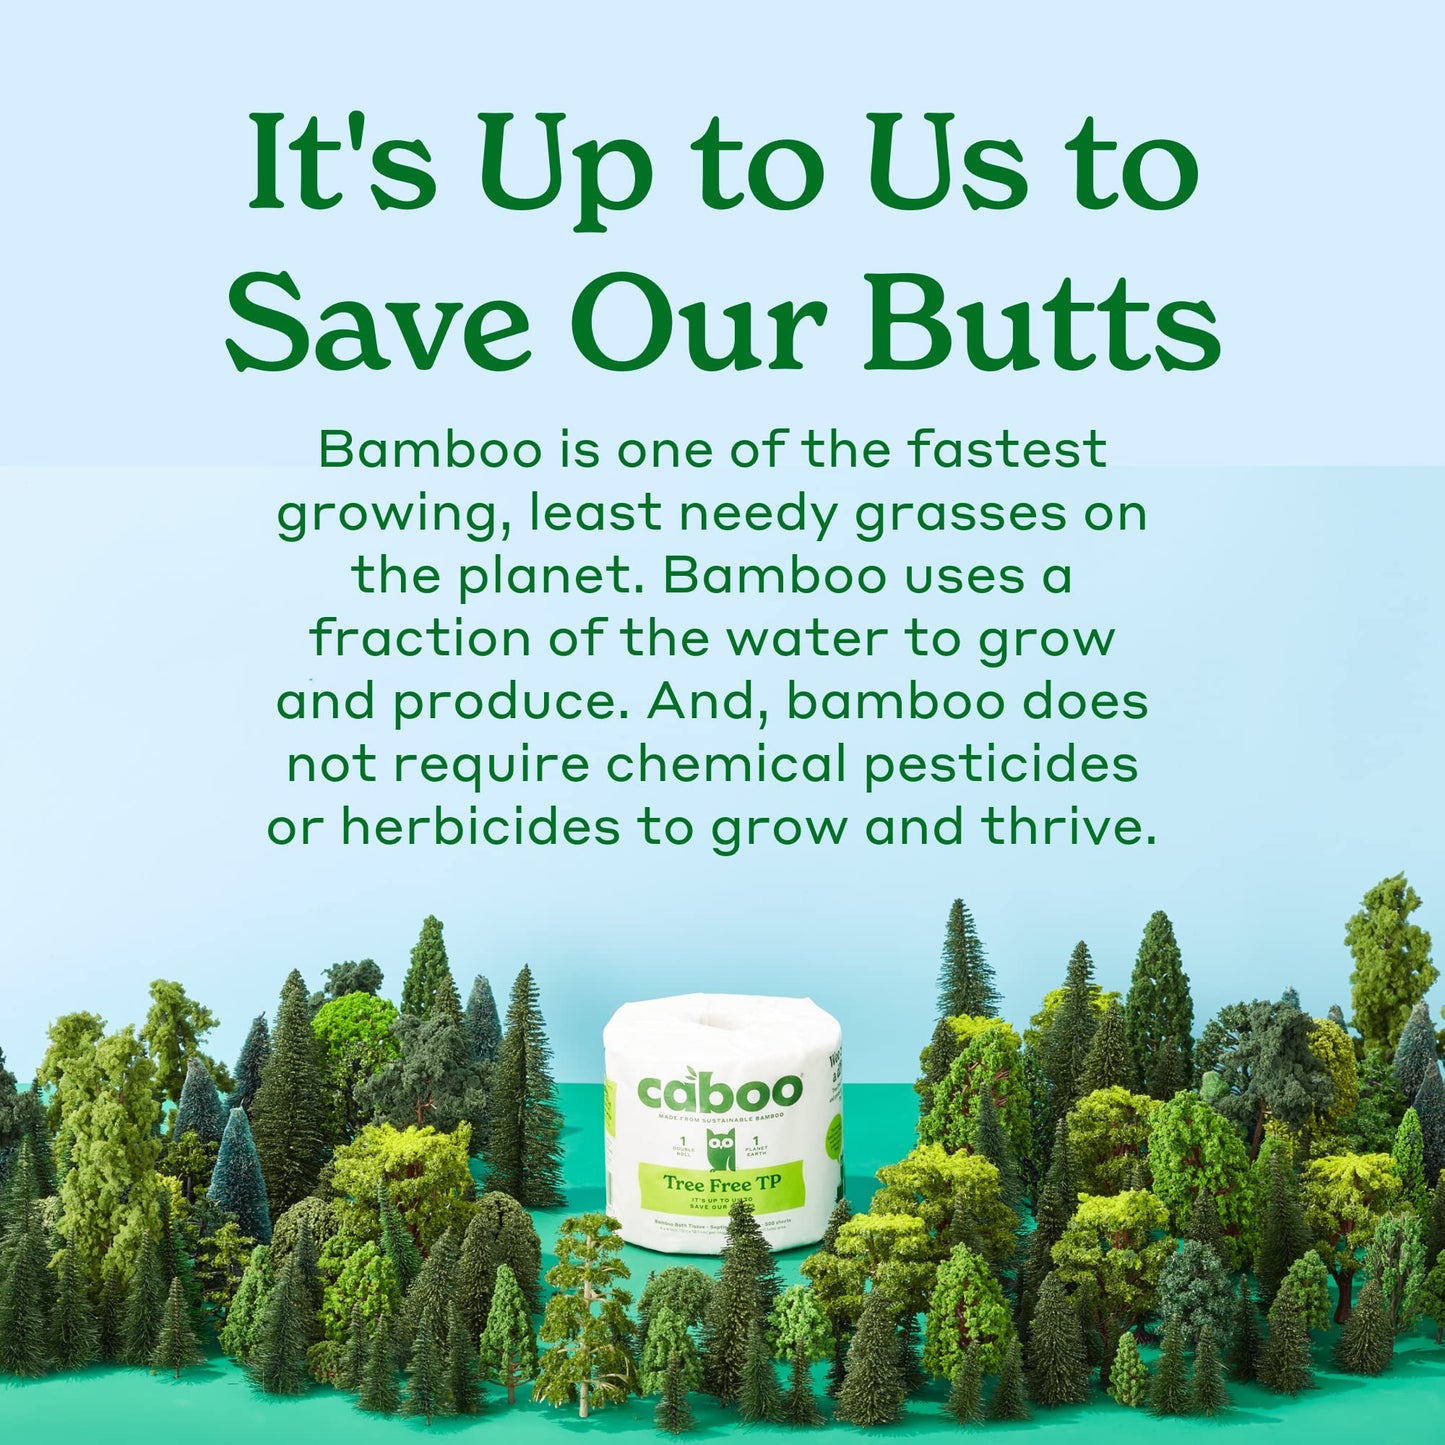 Caboo Tree Free Toilet Paper, Tree Free, Septic, Safe Biodegradable, Chemical Free Bath Tissue - 2 Ply Sheets, 300 Sheets Per Roll, 12 Double Rolls